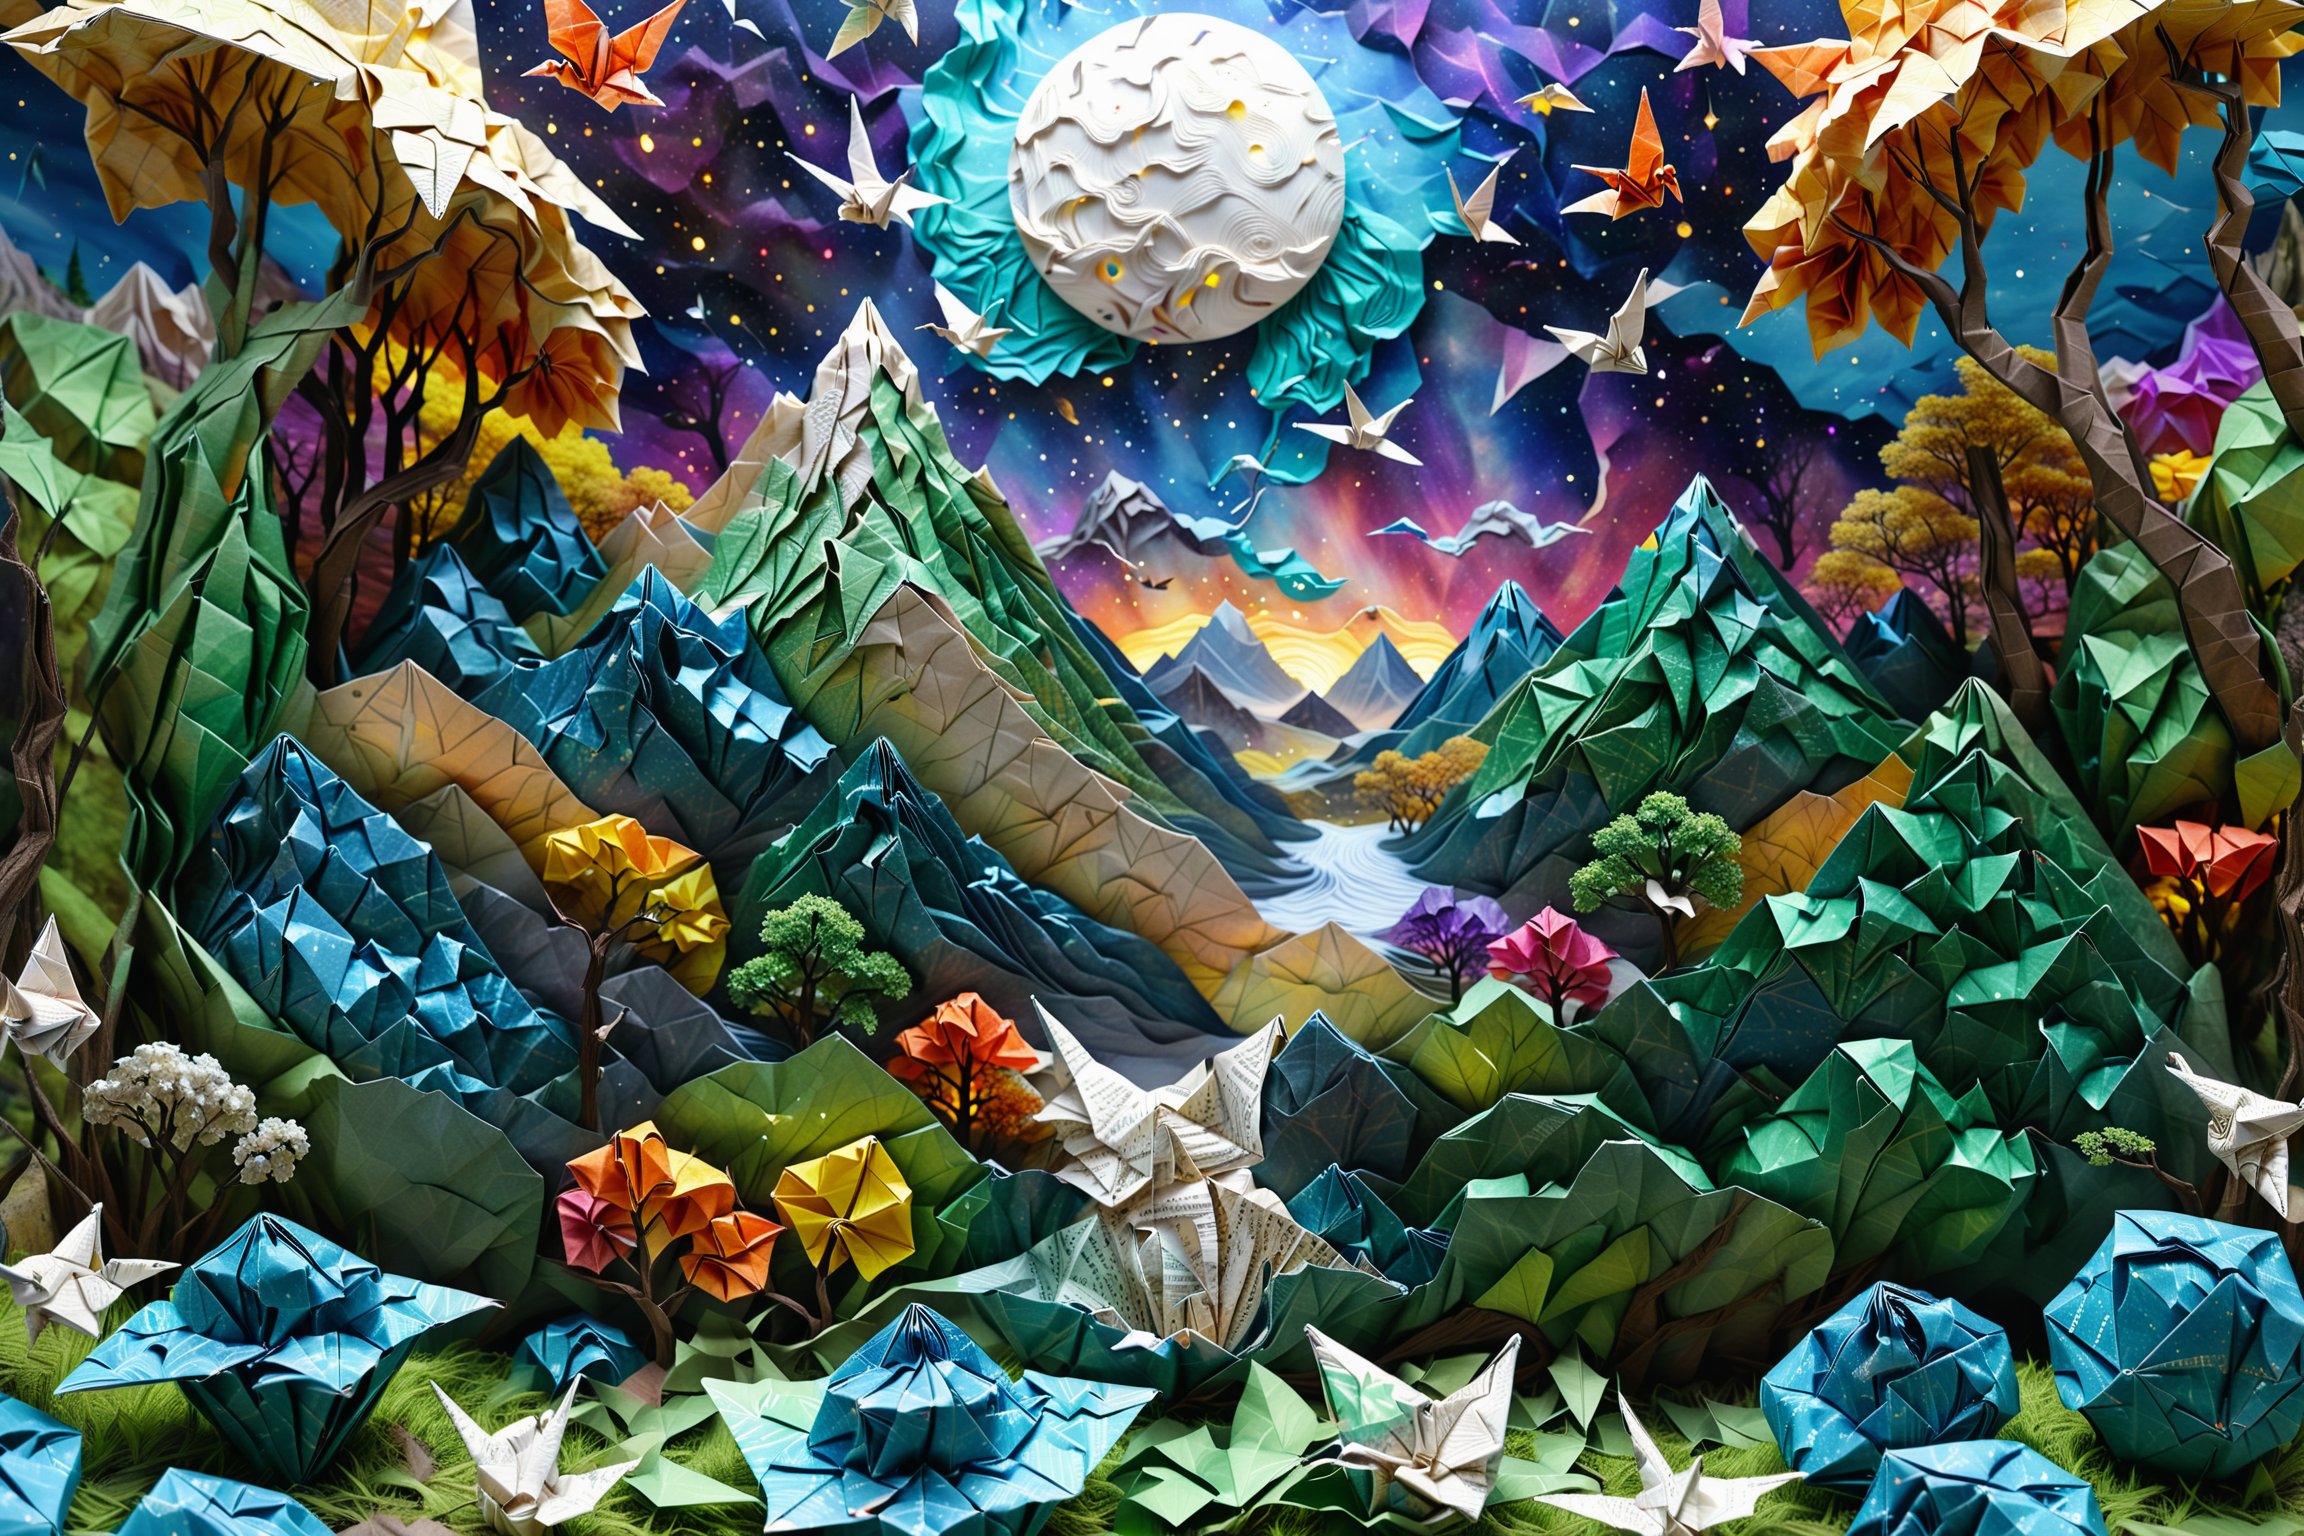 ((best quality)), ((masterpiece)), ((realistic,digital art)), (hyper detailed), DonMChr0m4t3rr4XL, score_9, score_8_up, score_7_up, score_6_up, a large intricately crafted origami_landscape, incredibly detailed beautiful mountain focus, Aerial shot, very zoomed out, night, no_light_noise, moon_light, artfully crafted crumpled paper galaxy poked full of holes many colored lights shining through, intricately crafted reflective paper origami moon, ethereal glowy smoke in the valley, soft light particles in focus, scenery closer made of meticulously detailed origami with visible folds and creases, distrant swirled tissue paper origami waterfall, crumpled paper stones, origami boulders, cut origami leaves on trees, shredded paper blades of grass, intricately detailed, detailmaster2, more detail XL, magical, whimsical, fairytale, fantasy, 8K, HDR